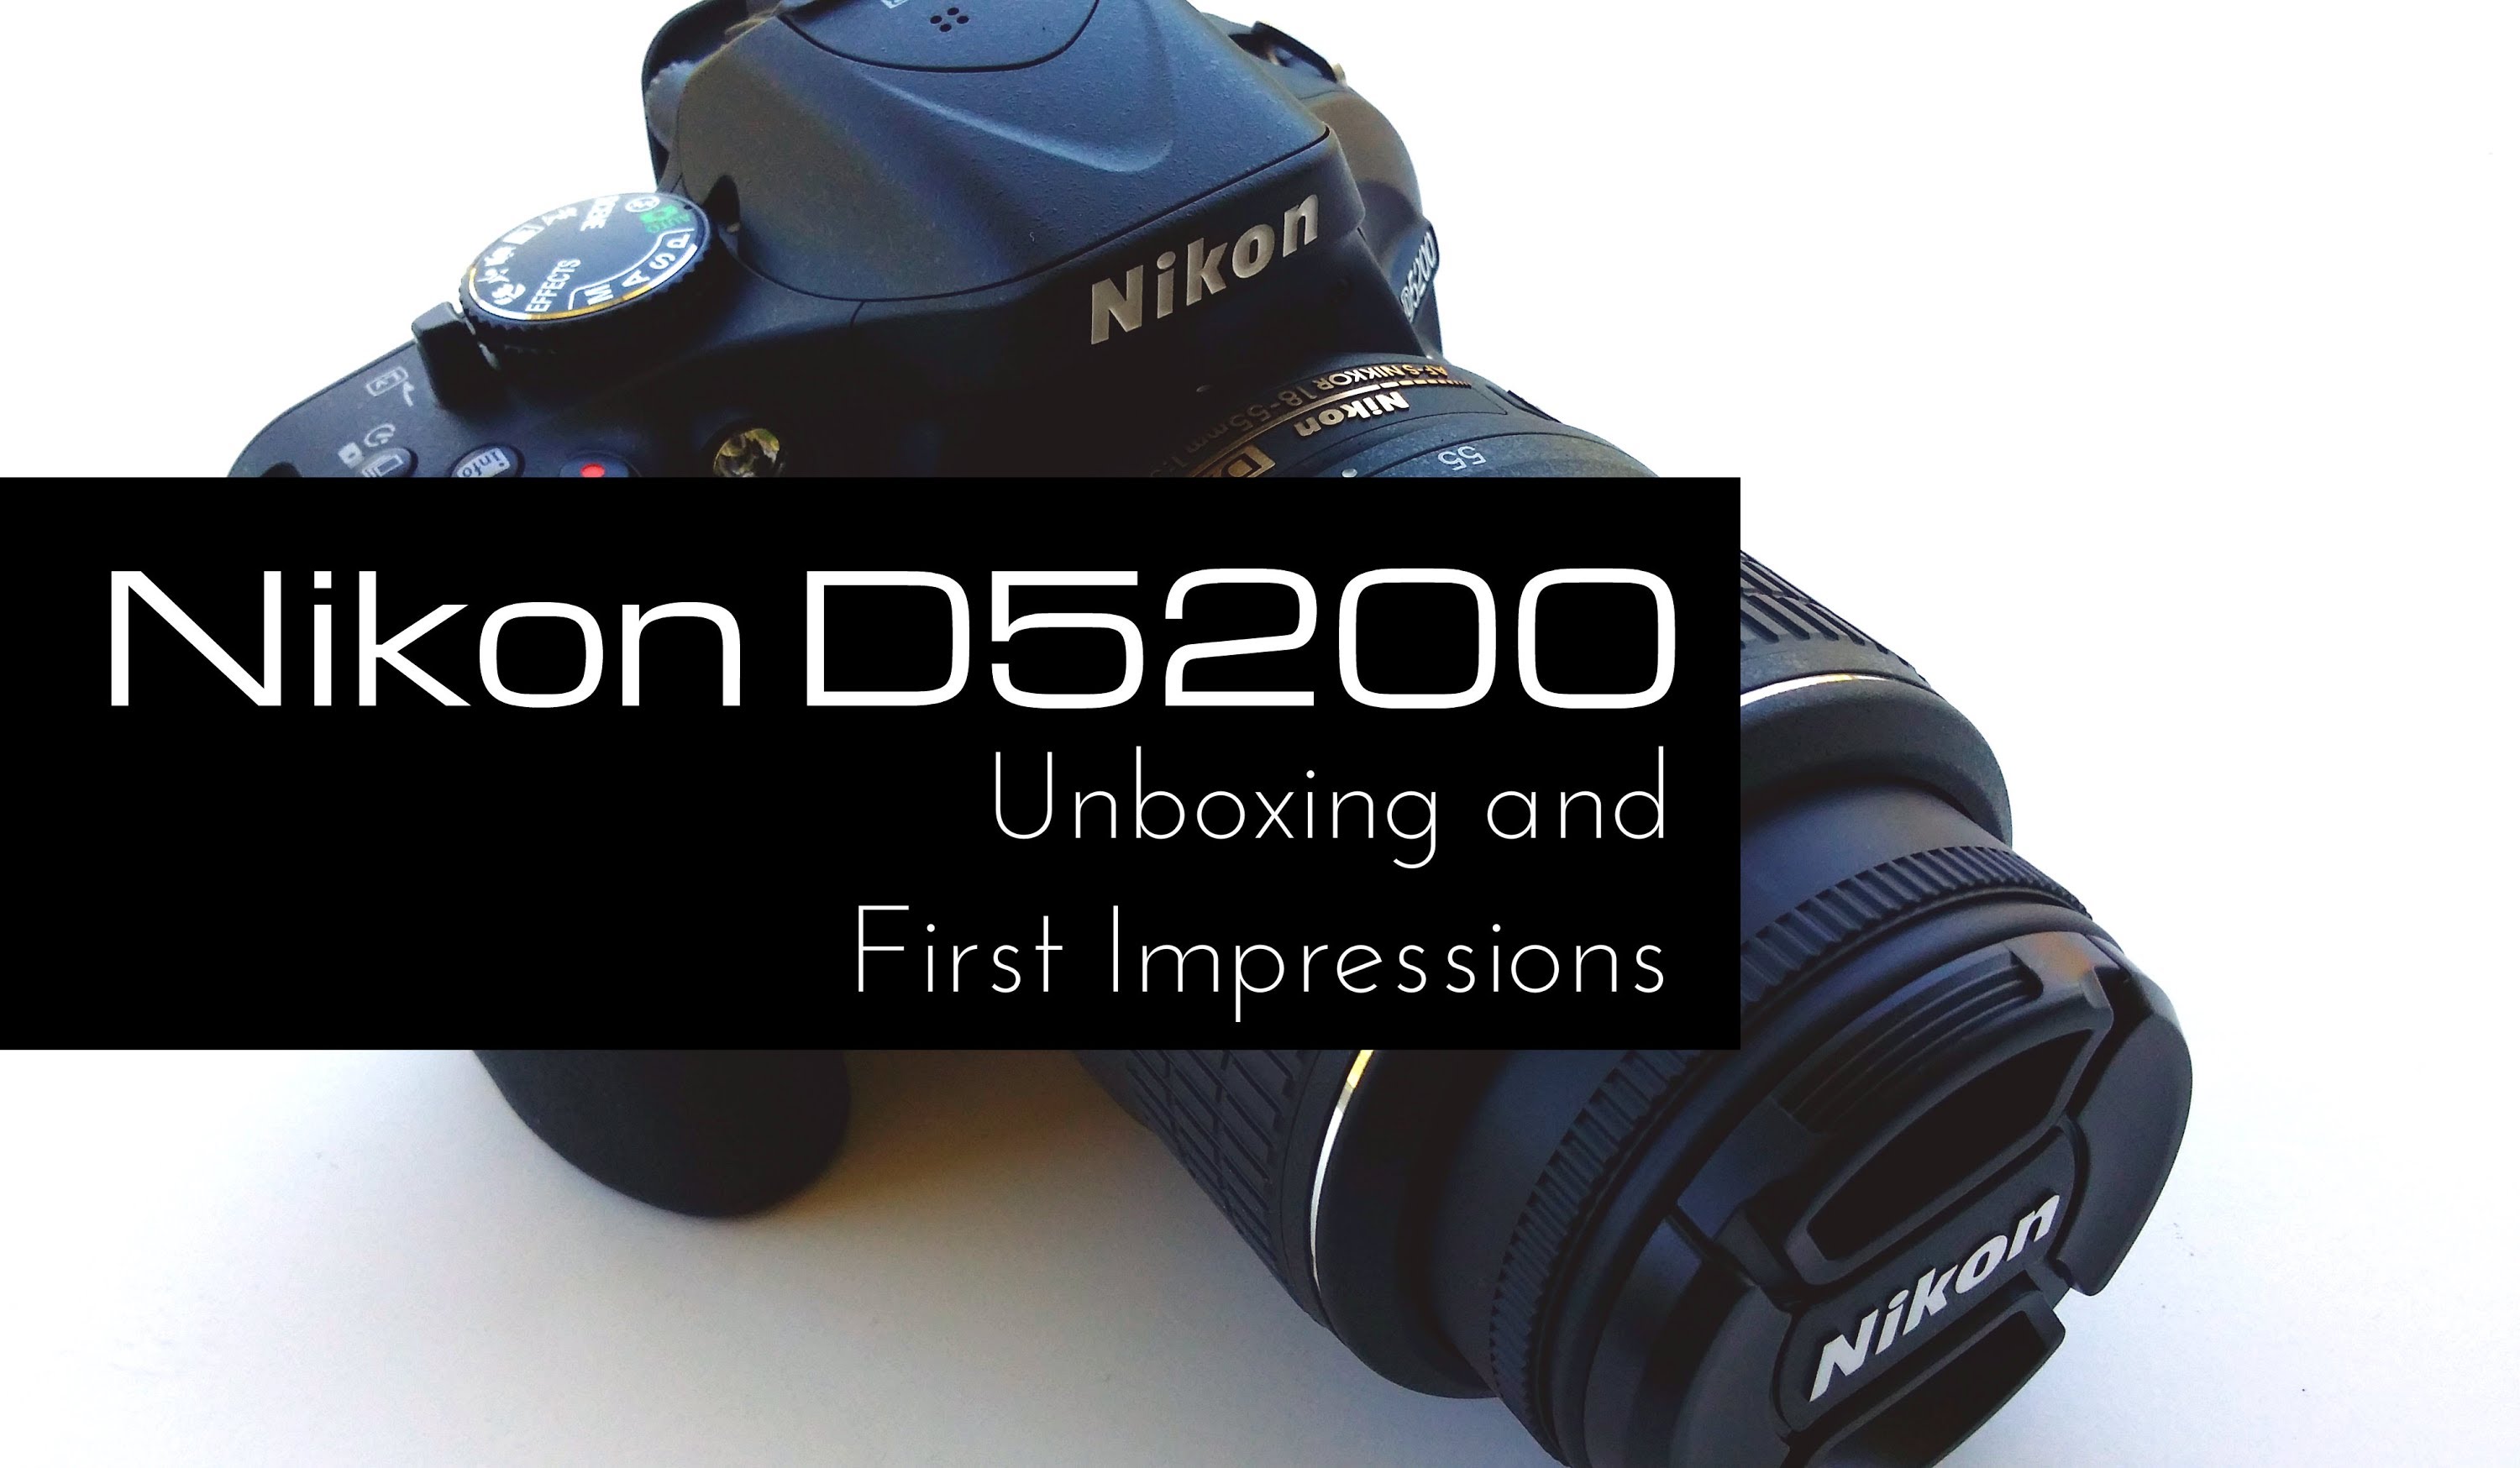 Nikon D5200 Unboxing and First Impressions